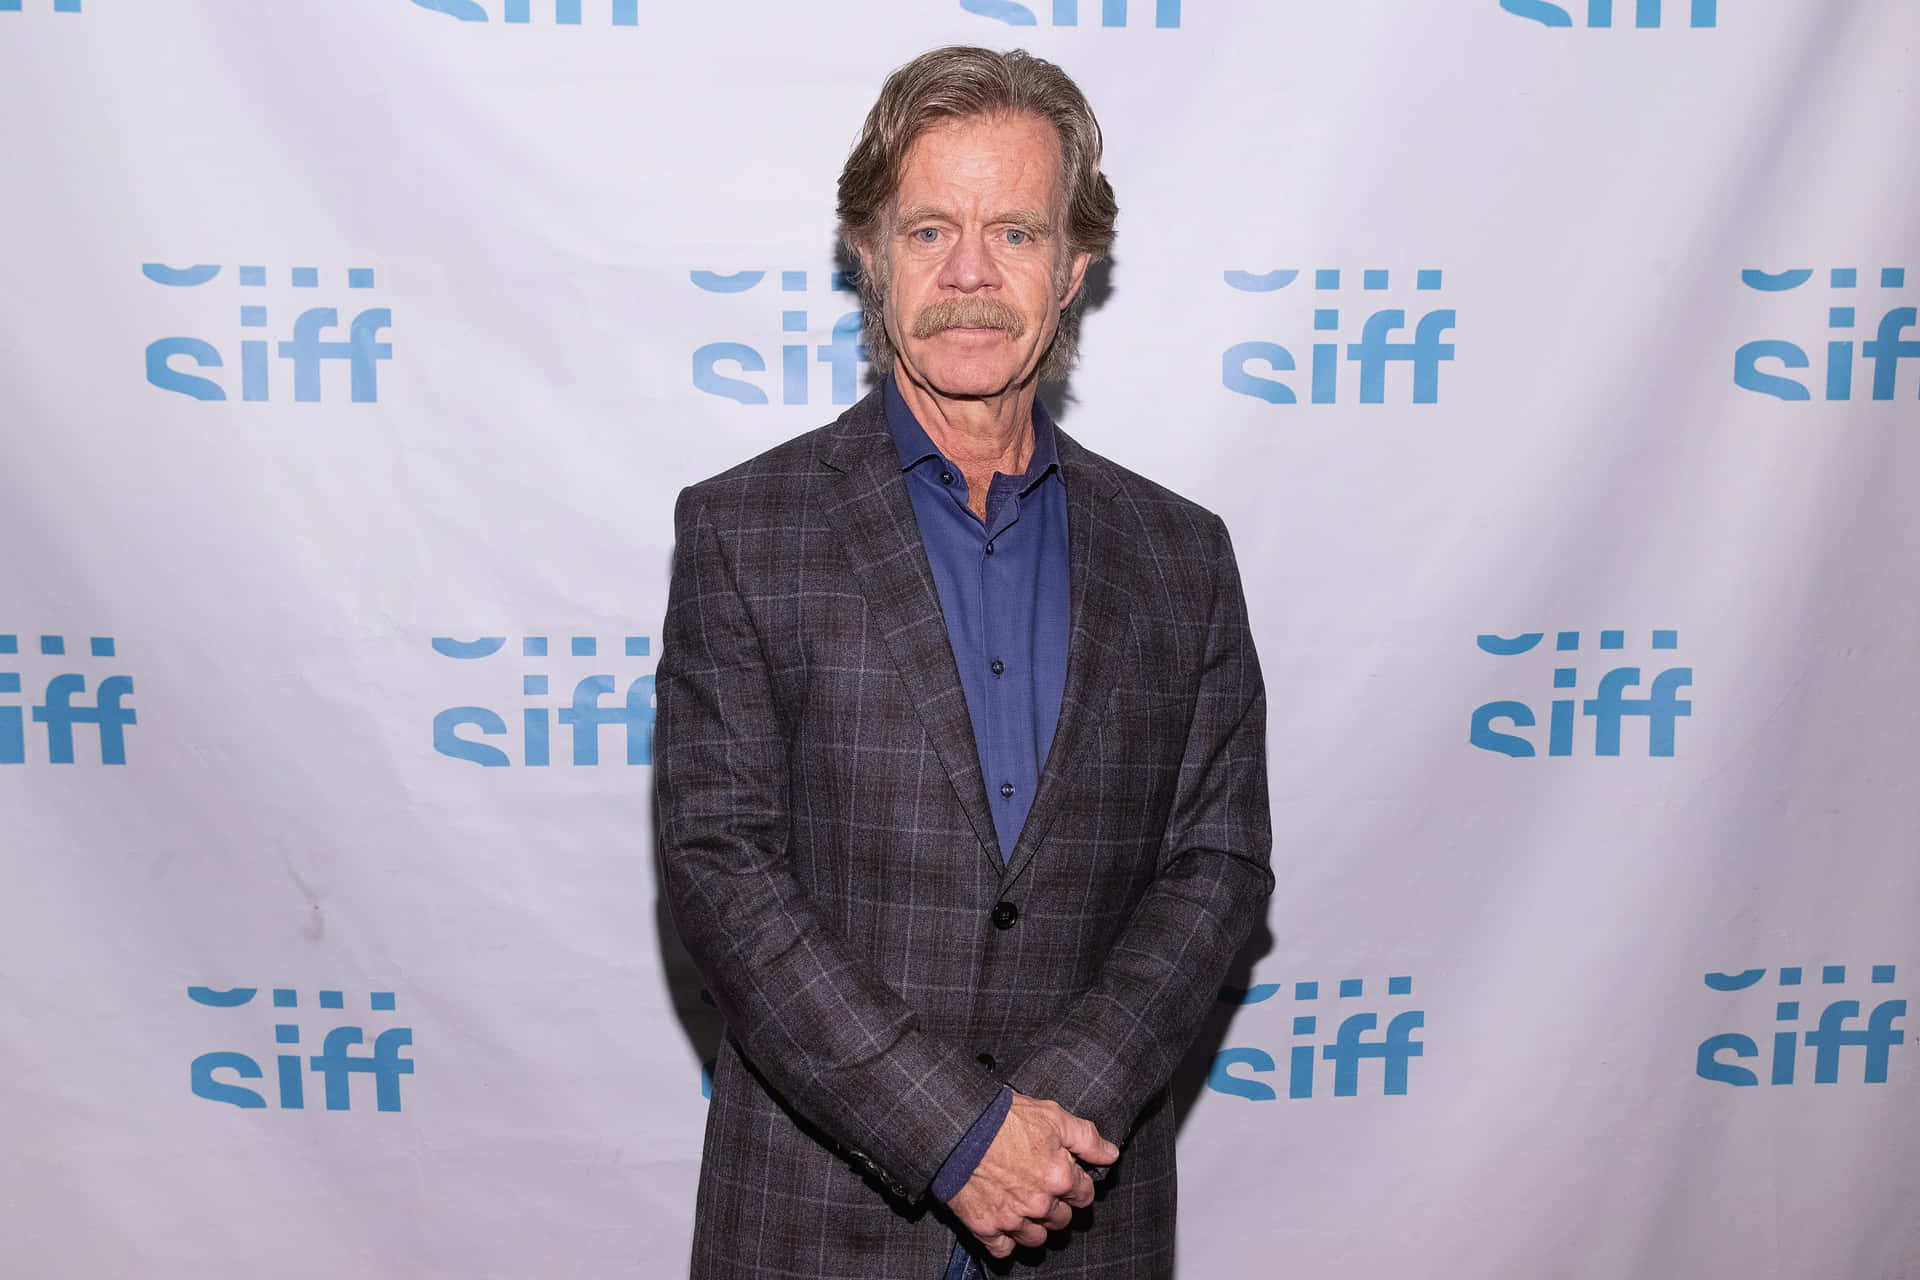 William H. Macy: Talented Actor In A Thoughtful Pose Background